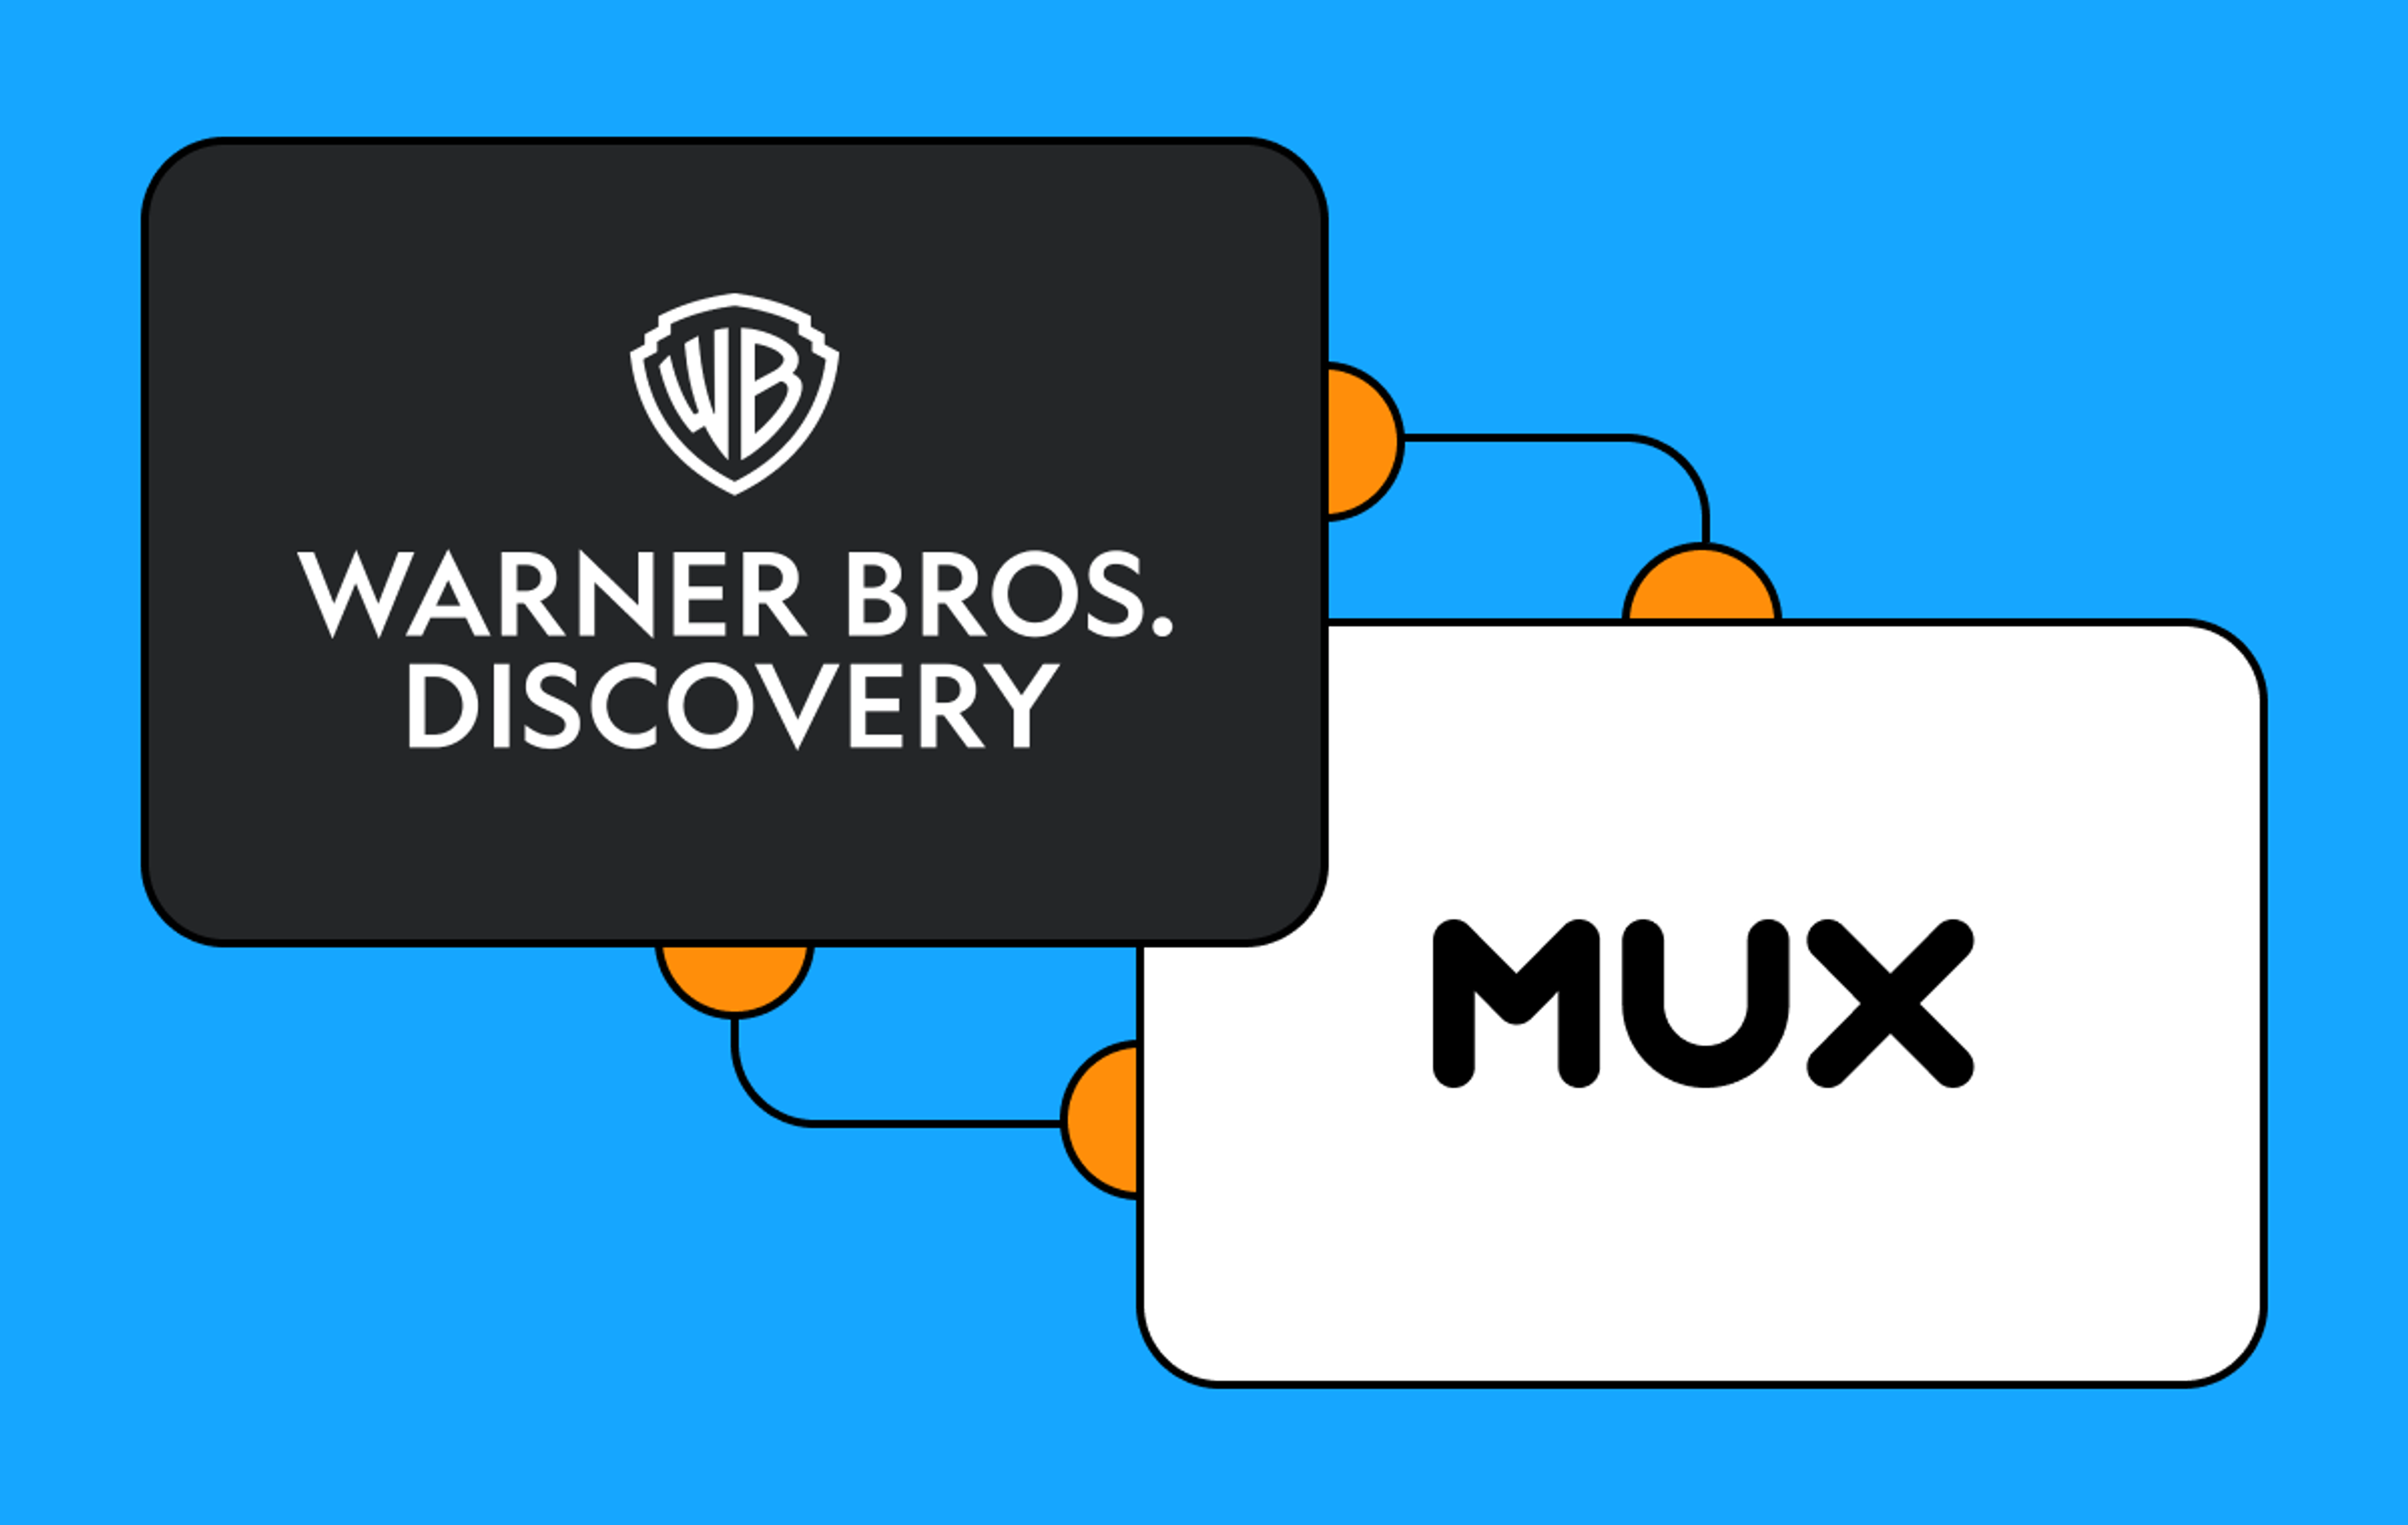 On a blue background, a box with a black background featuring the Warner Bros. Discovery logo connected to a box with a white background featuring the Mux logo connected by 2 lines